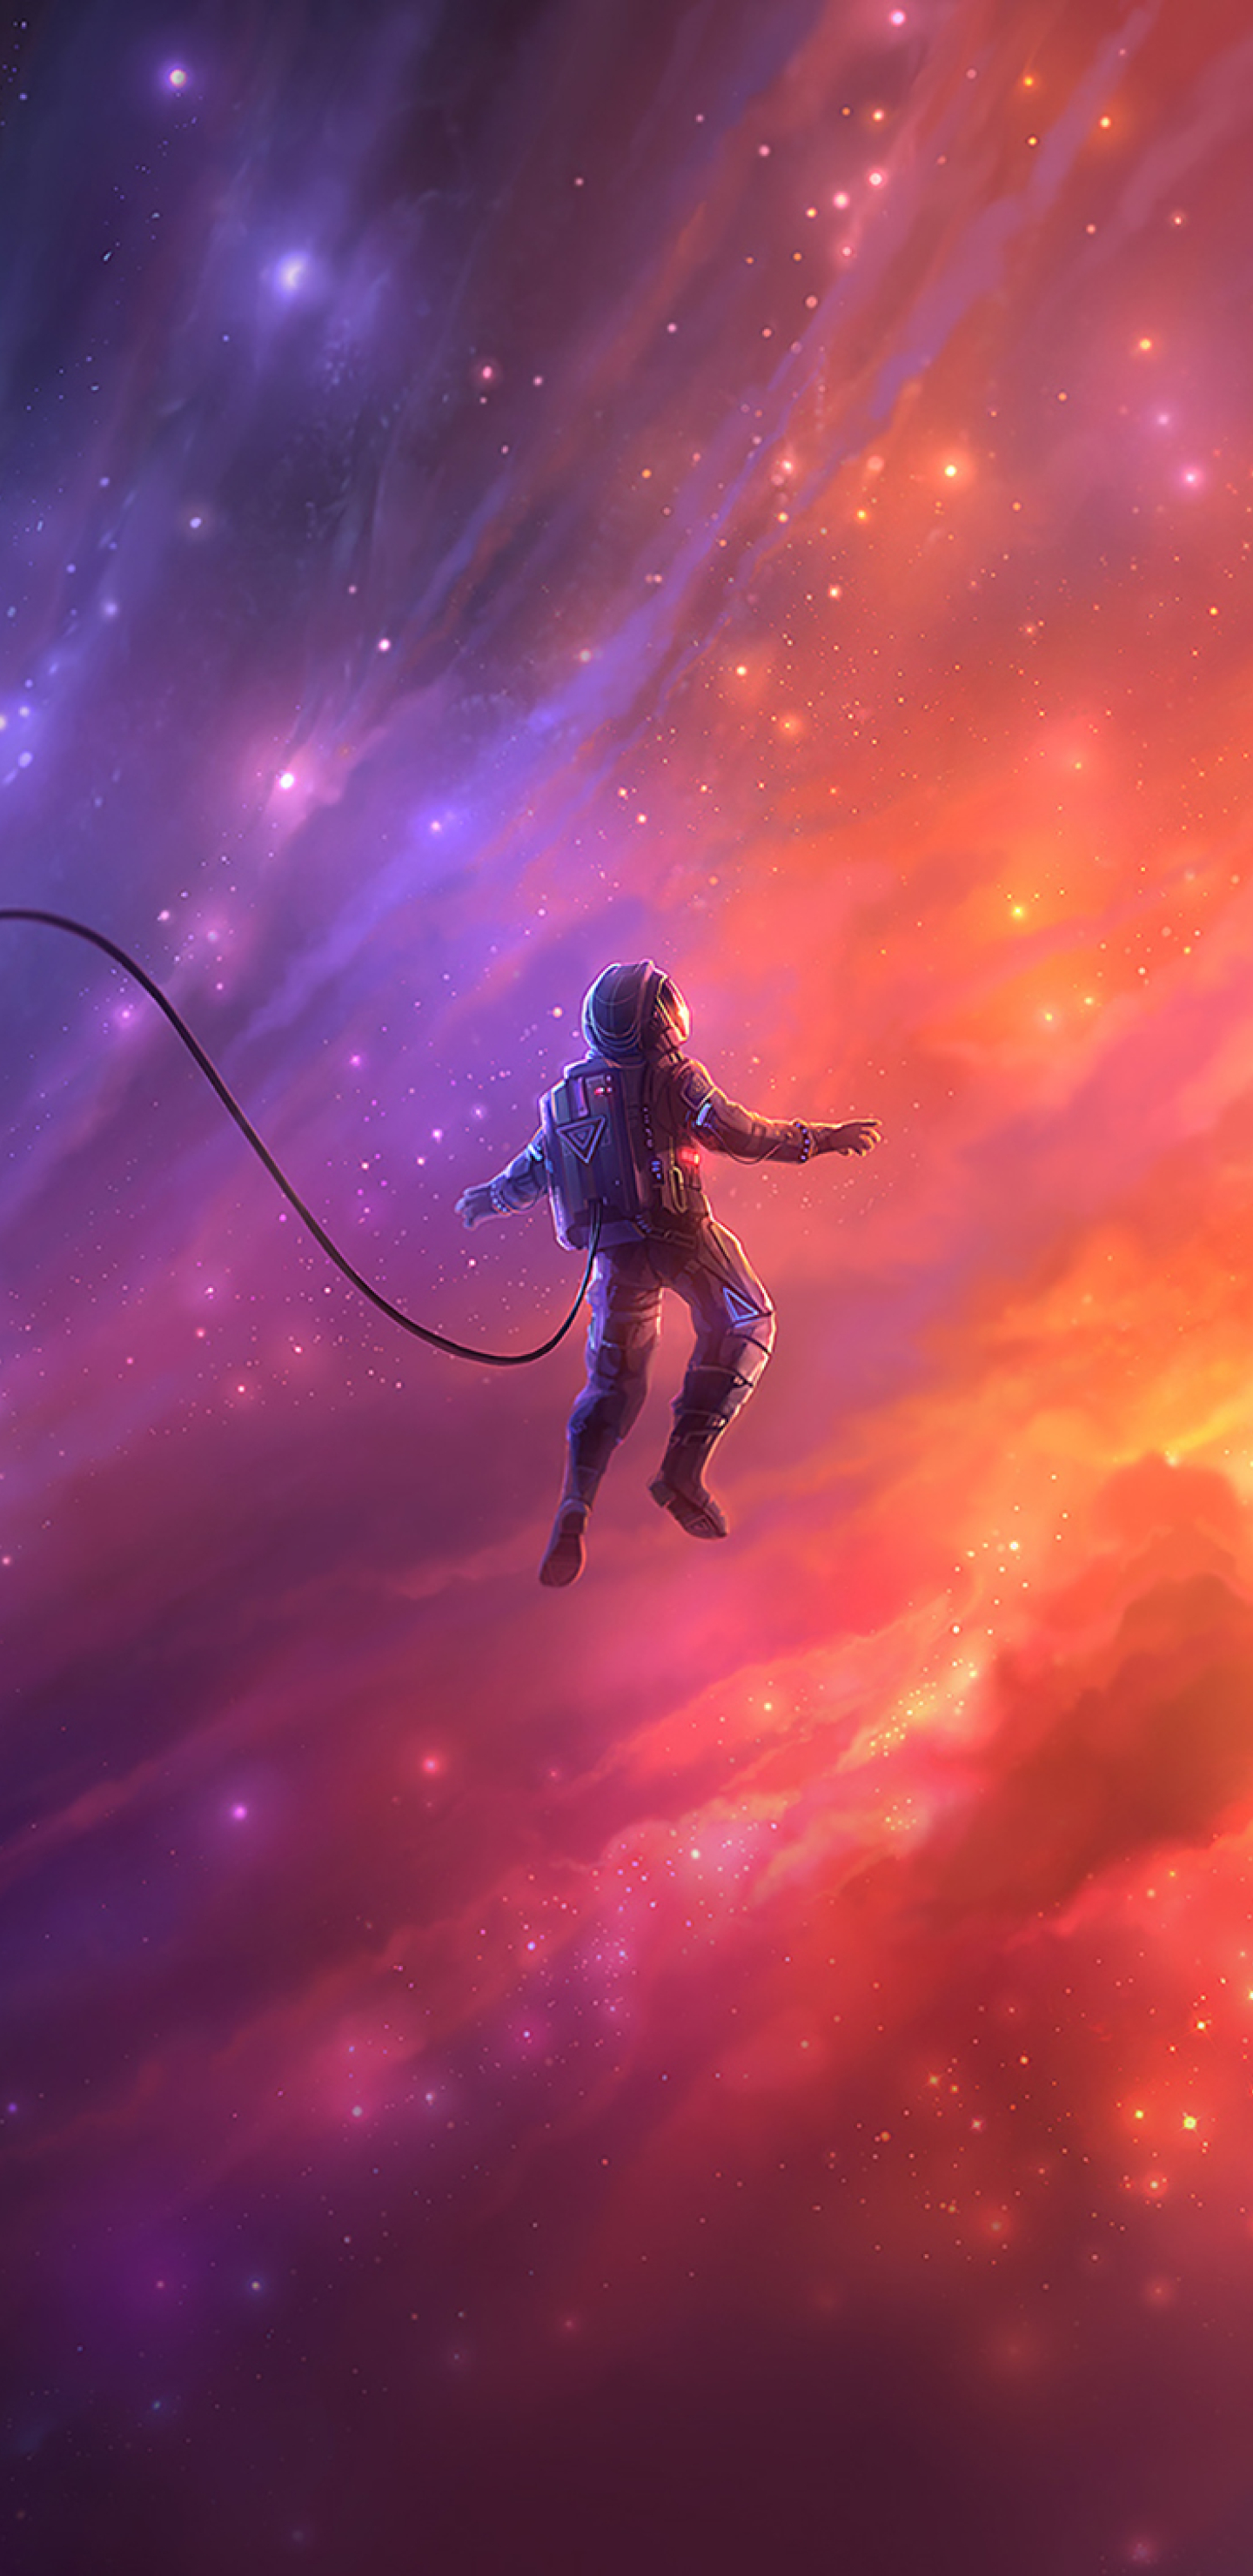 1440x2960 Astronaut In Space Samsung Galaxy Note 9,8, S9,S8,S8+ QHD